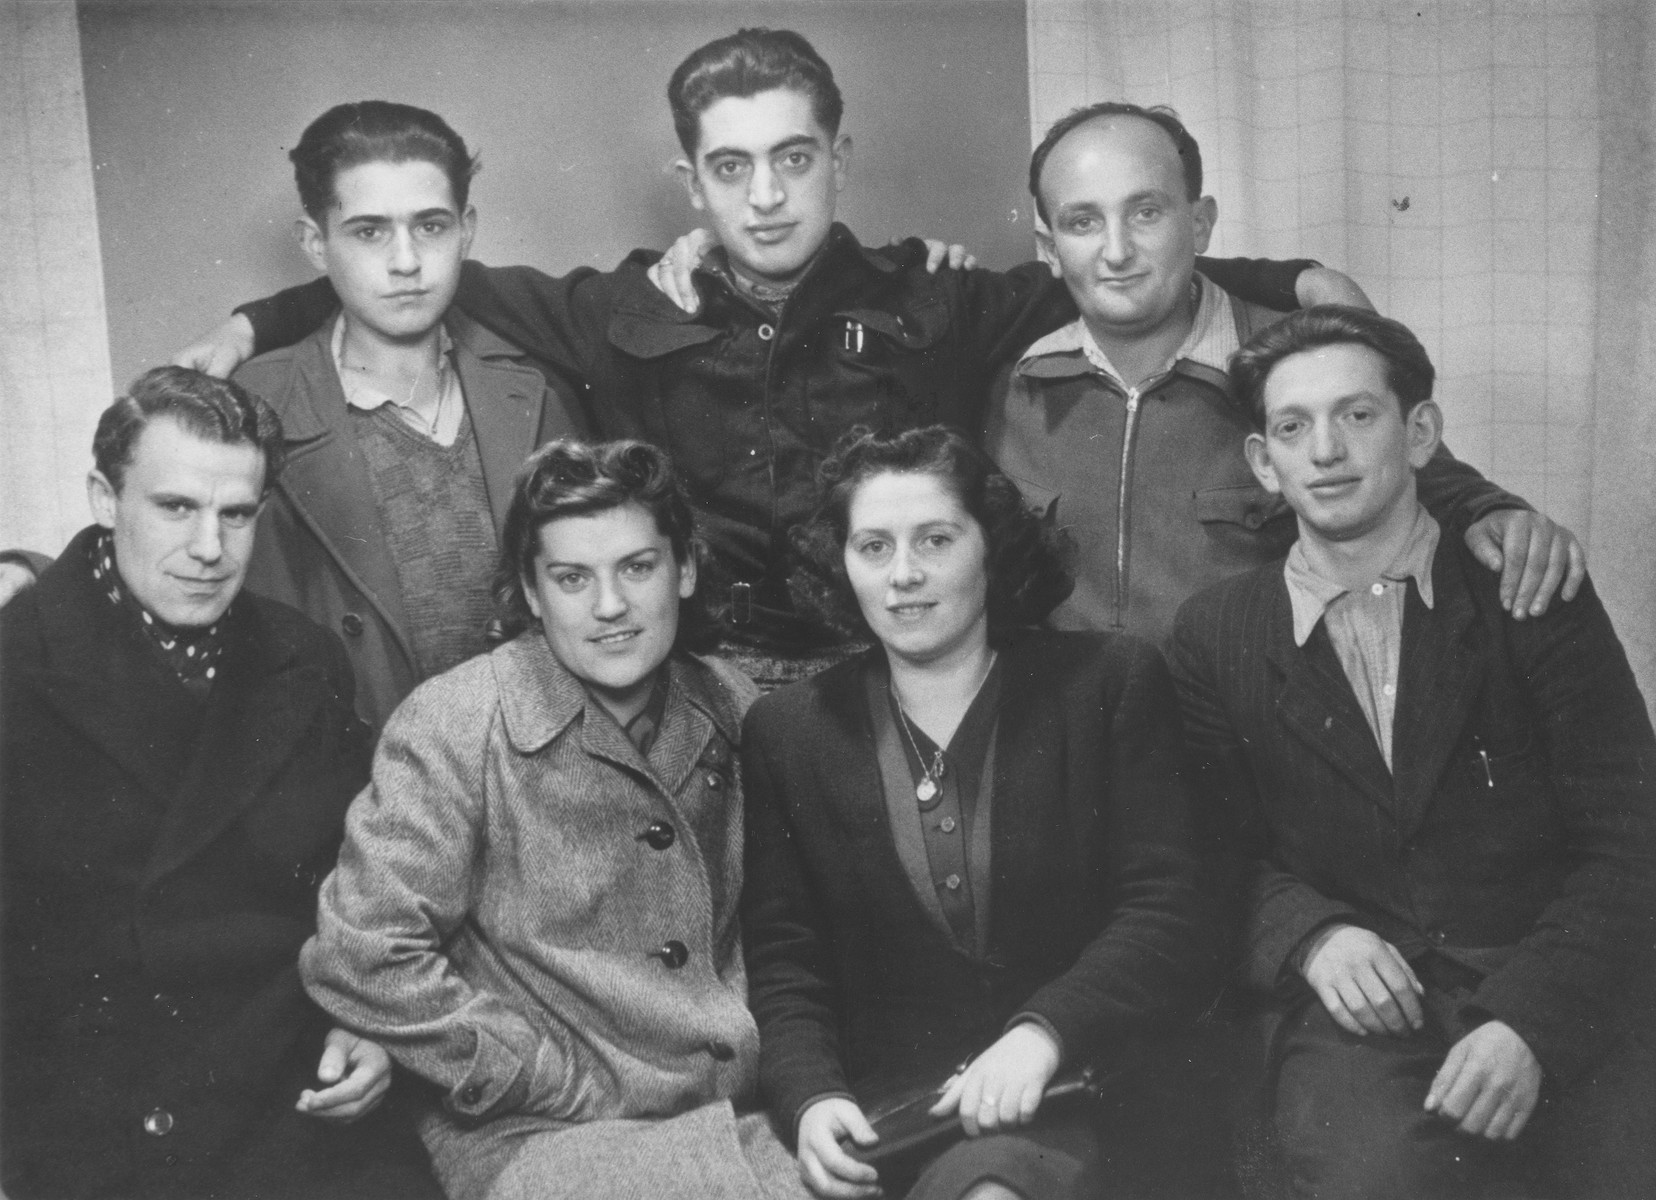 Shmuel Rakowski (top row, center) poses with a group of Jewish survivors from Mukachevo who he escorted out of Poland on a Bricha route.